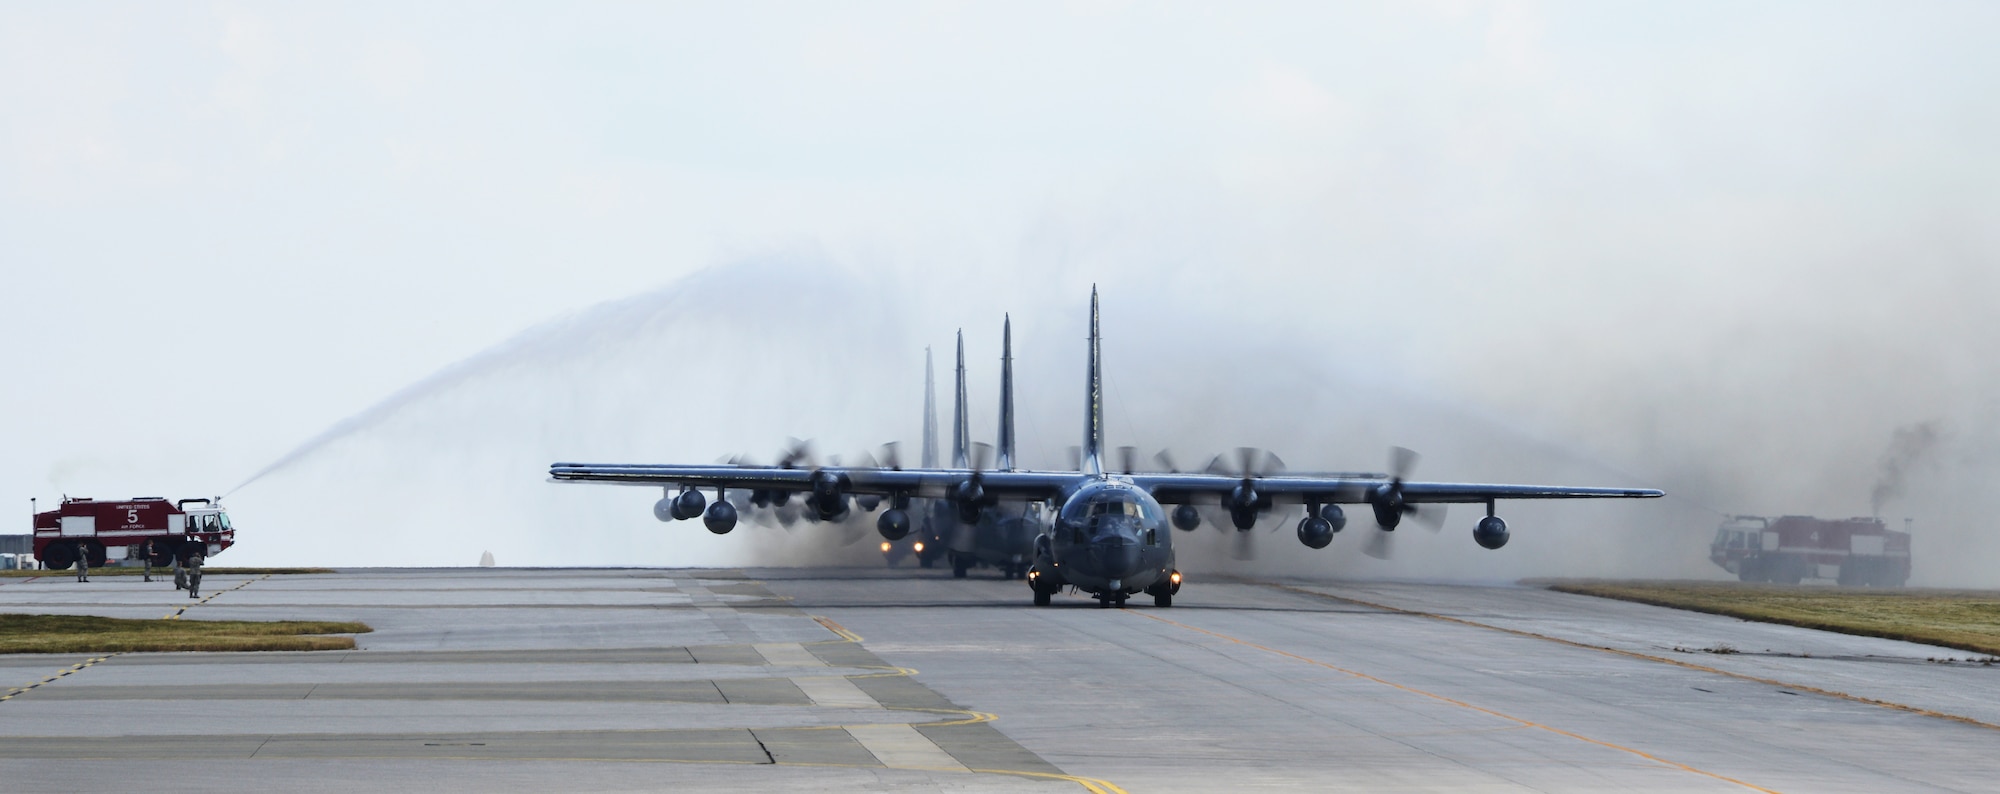 Four MC-130P Combat Shadows taxi through the water arch after completing a final 4-ship formation flight Oct. 16, 2014.  Over the next year, the MC-130P Combat Shadow aircraft in the Pacific will be replaced with the MC-130J Commando II.  (U.S. Air Force photo by Tech. Sgt. Kristine Dreyer)